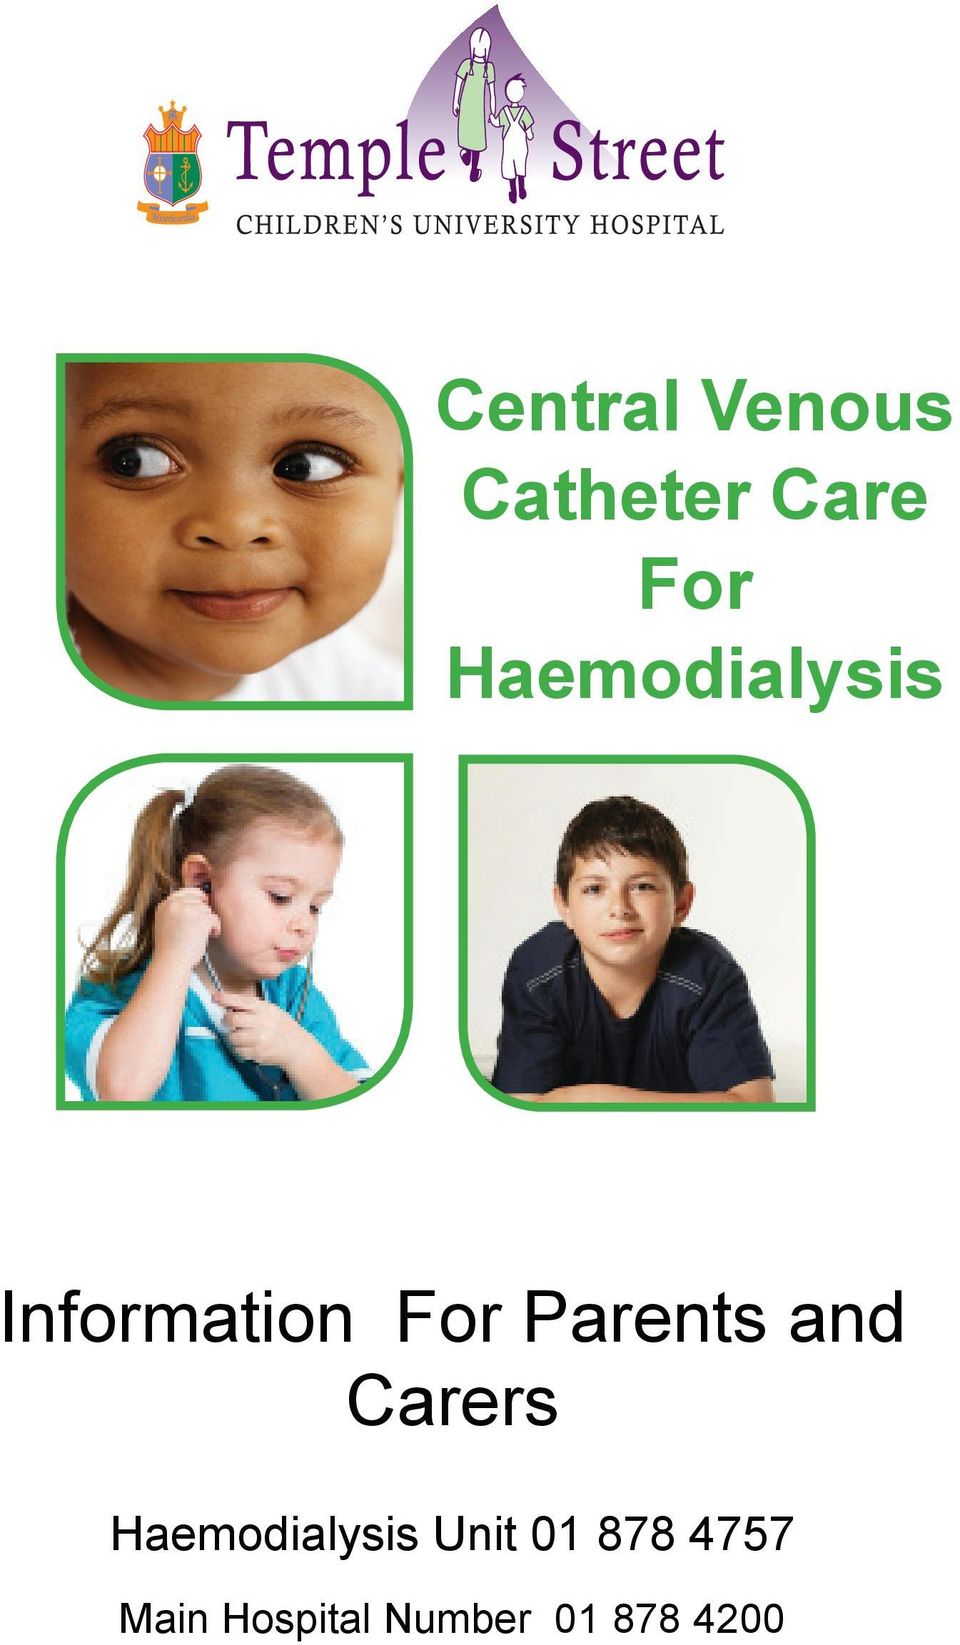 Parents and Carers Haemodialysis